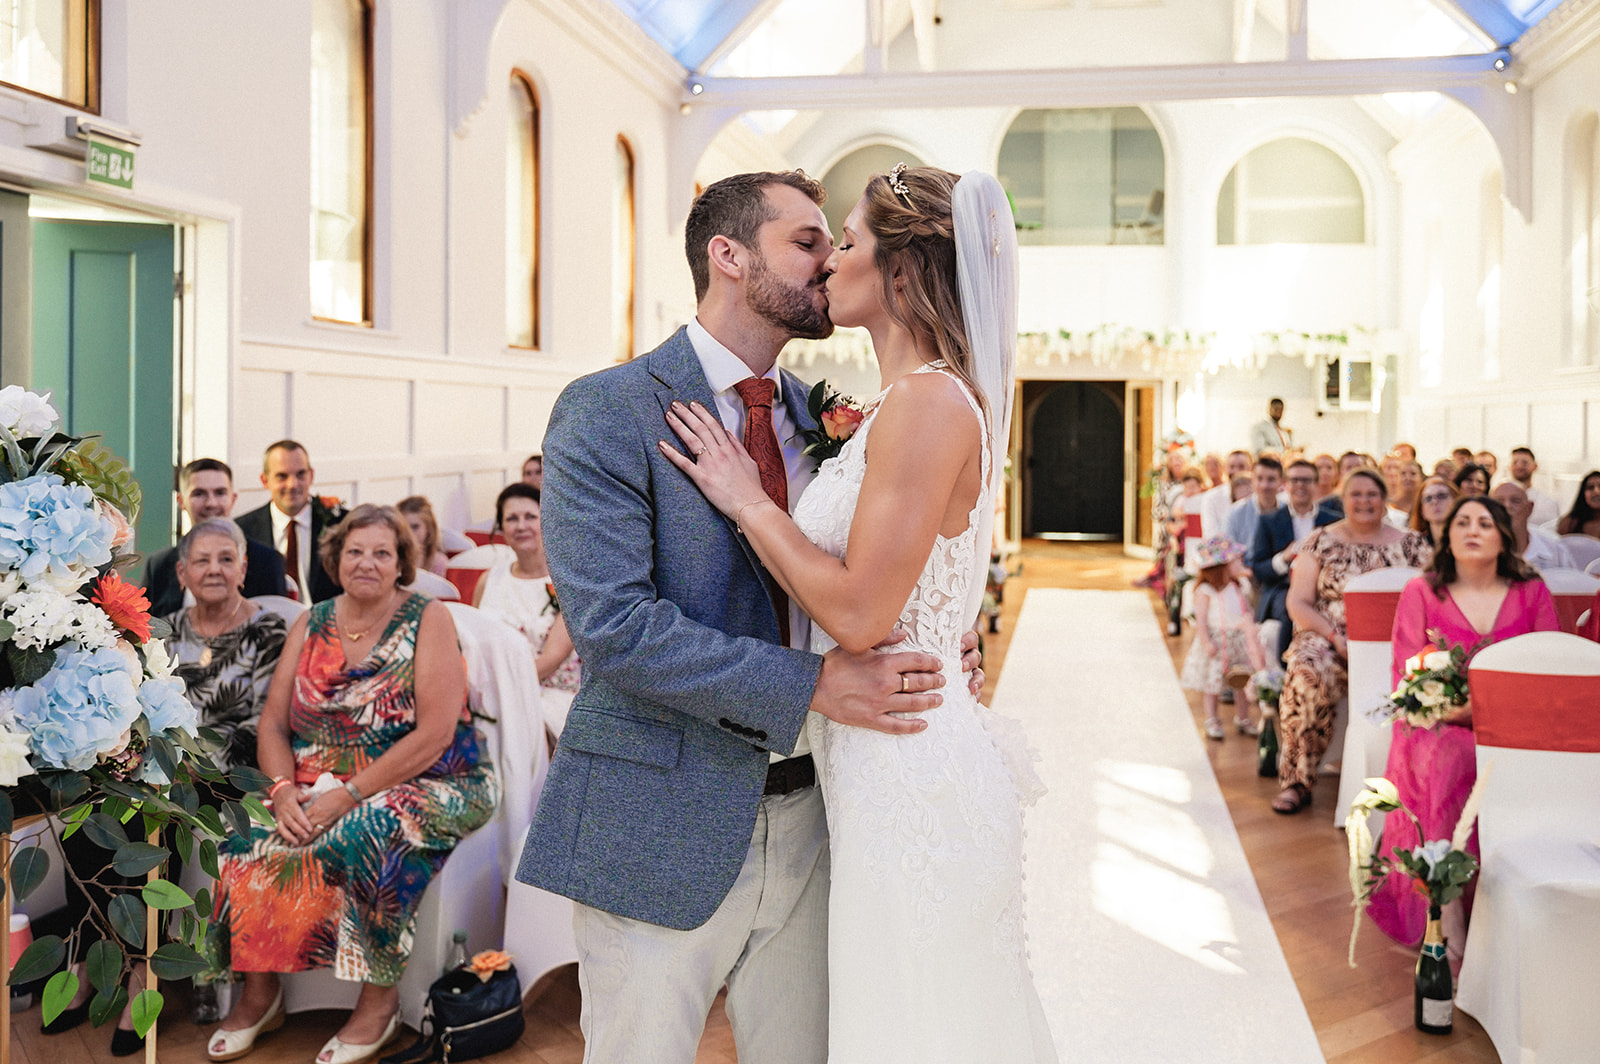 Natalie and George kissing during the wedding ceremony at Ashburton Hall